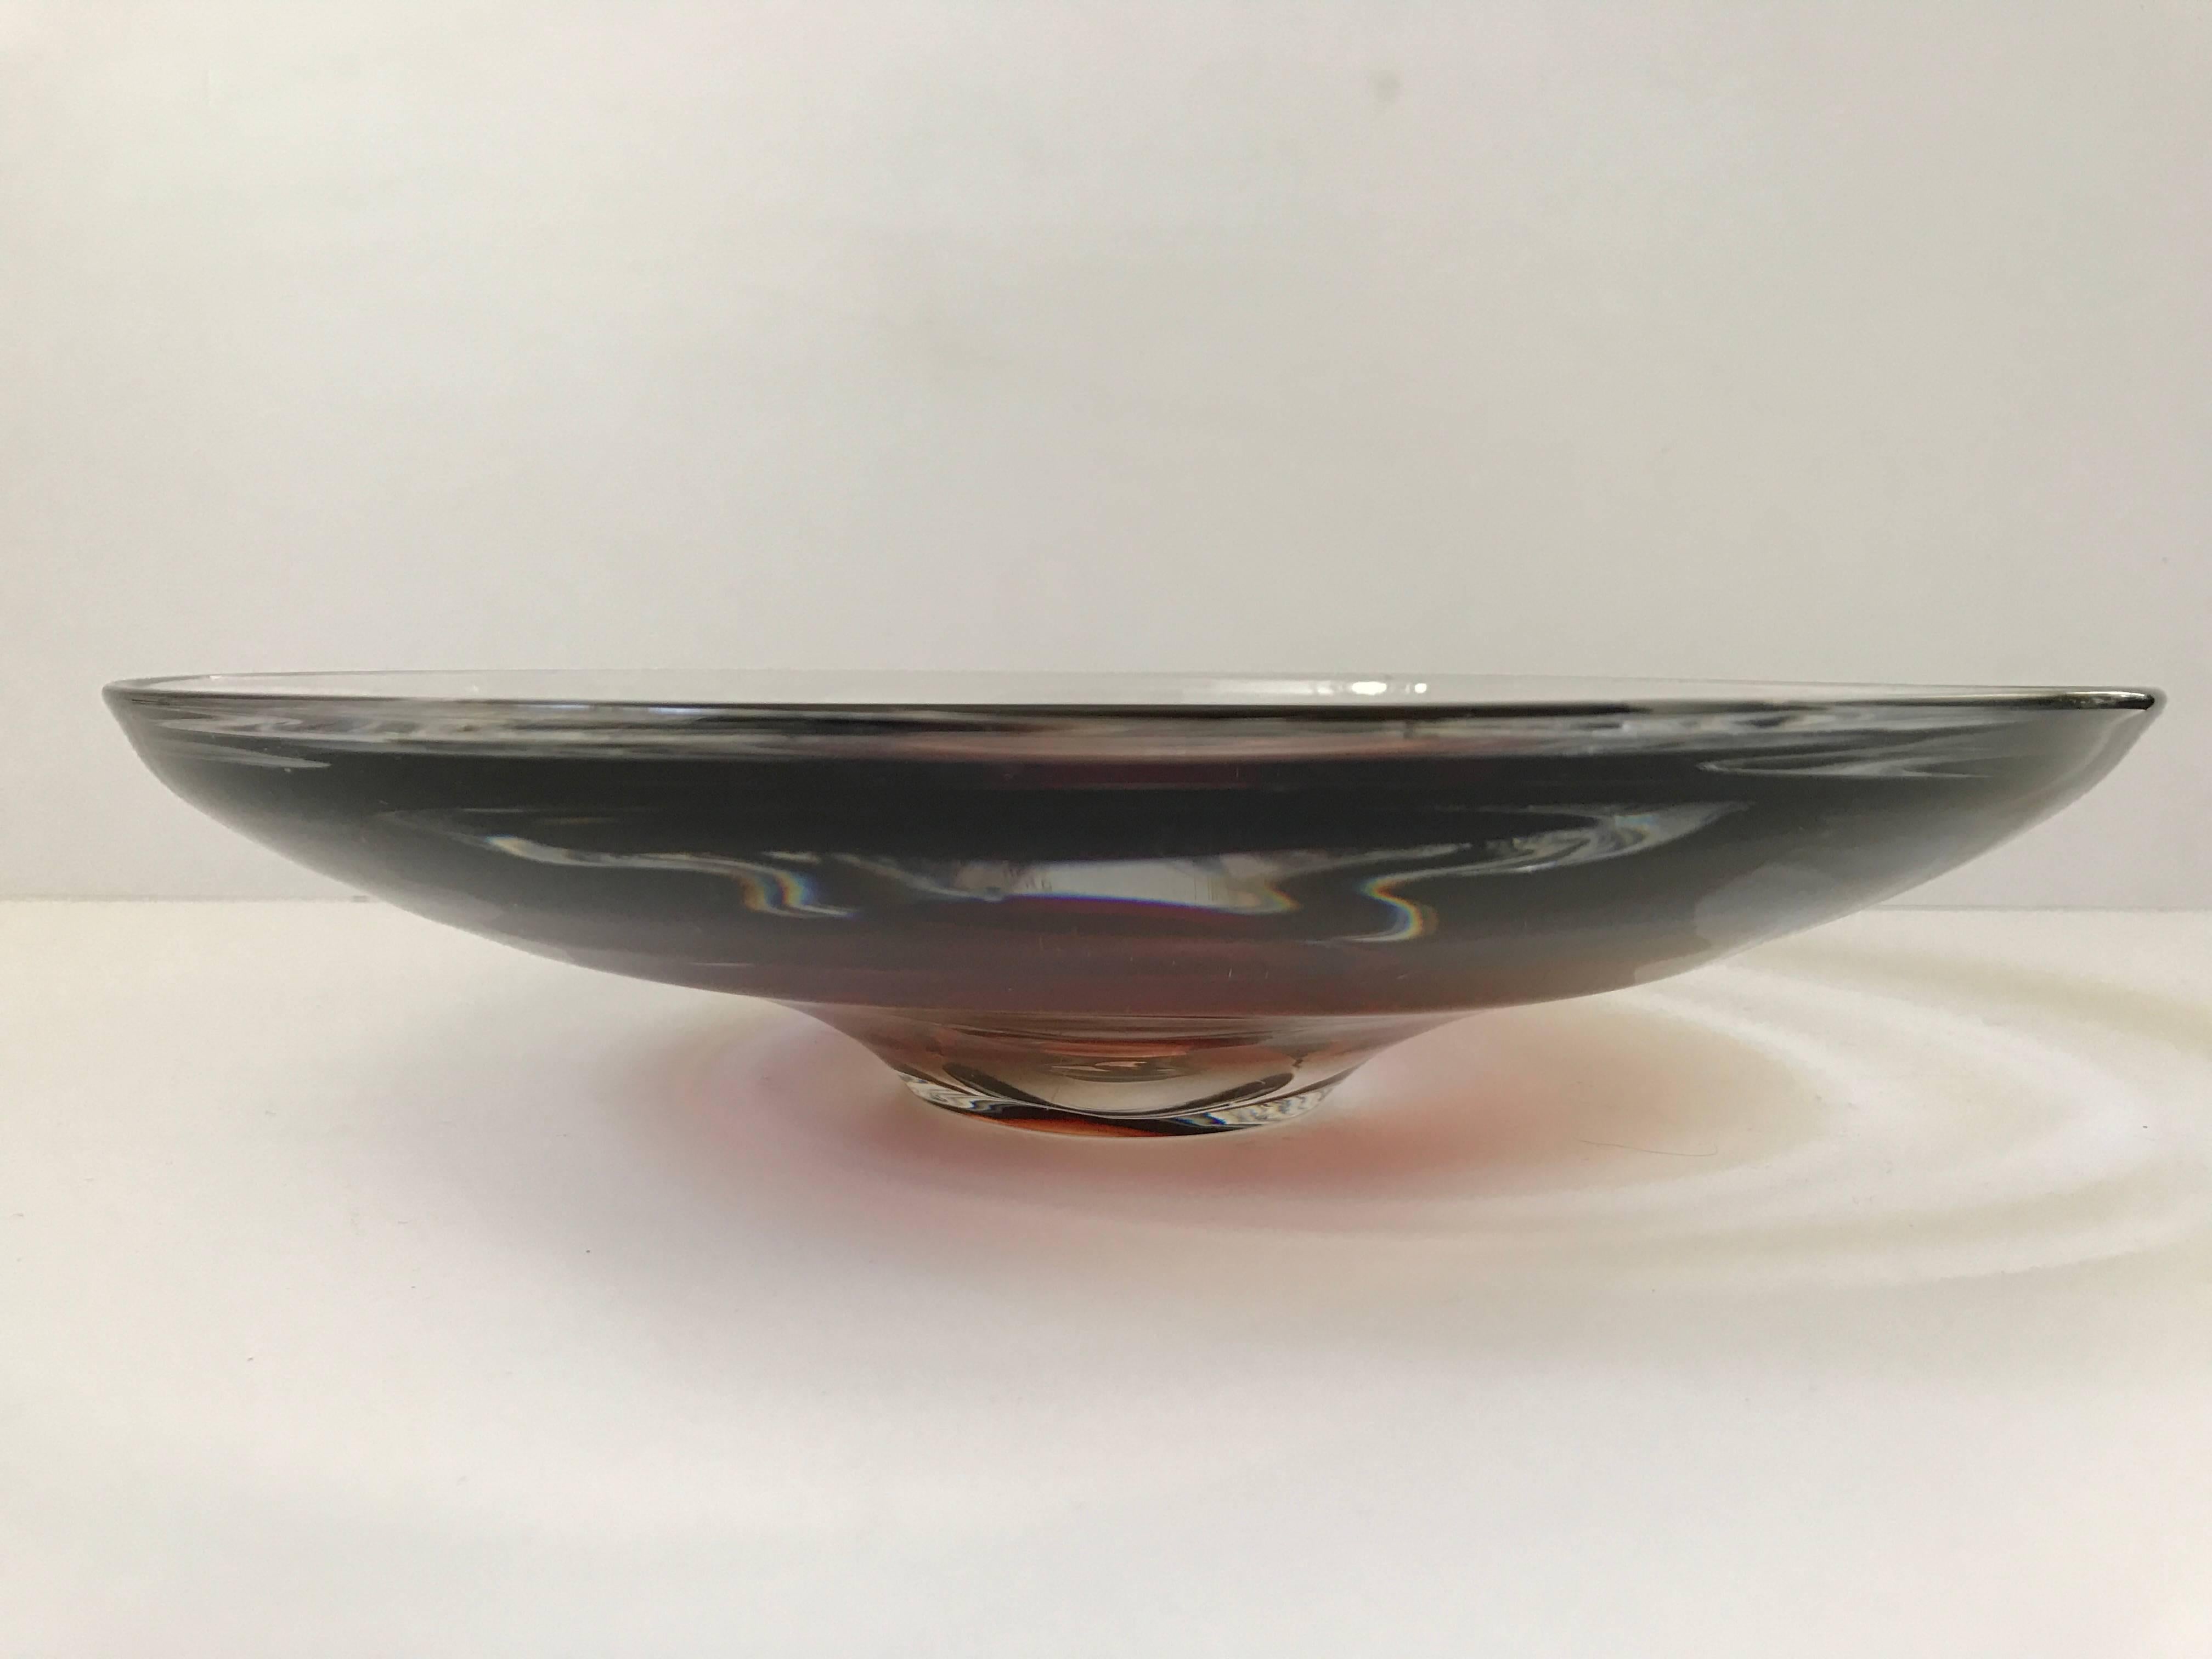 Mid-20th century Orrefors Swedish glass dish or bowl made, circa 1950. This beautiful glass dish or bowl is marked "Orrefors nr 4085" but not marked with makers signature. It has a wonderful strong red color and is shaped nicely to